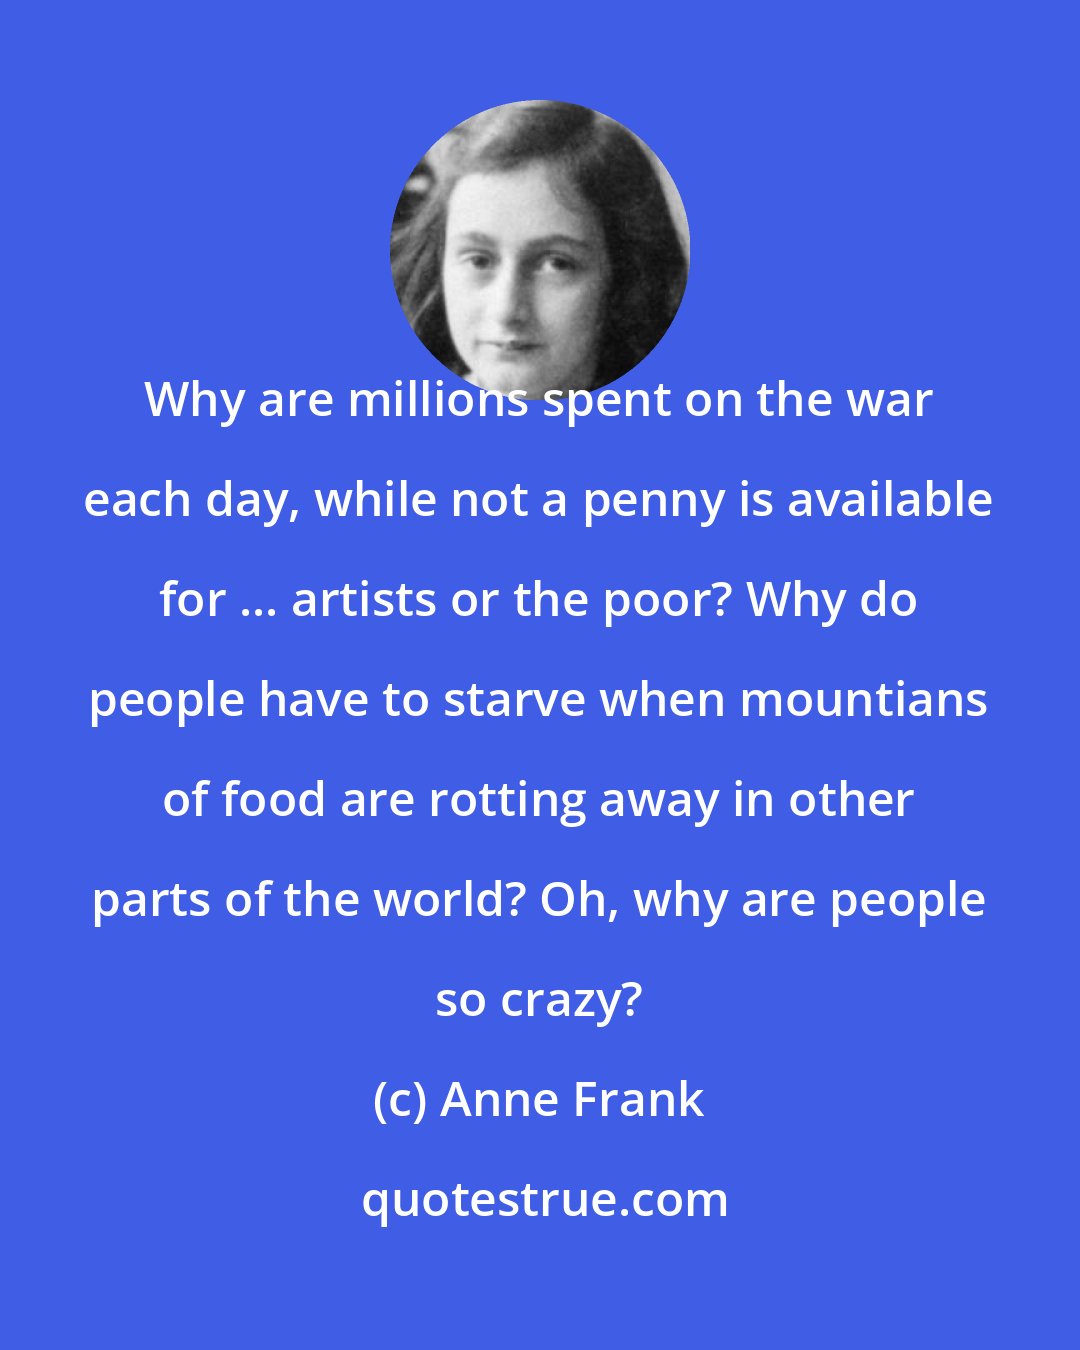 Anne Frank: Why are millions spent on the war each day, while not a penny is available for ... artists or the poor? Why do people have to starve when mountians of food are rotting away in other parts of the world? Oh, why are people so crazy?